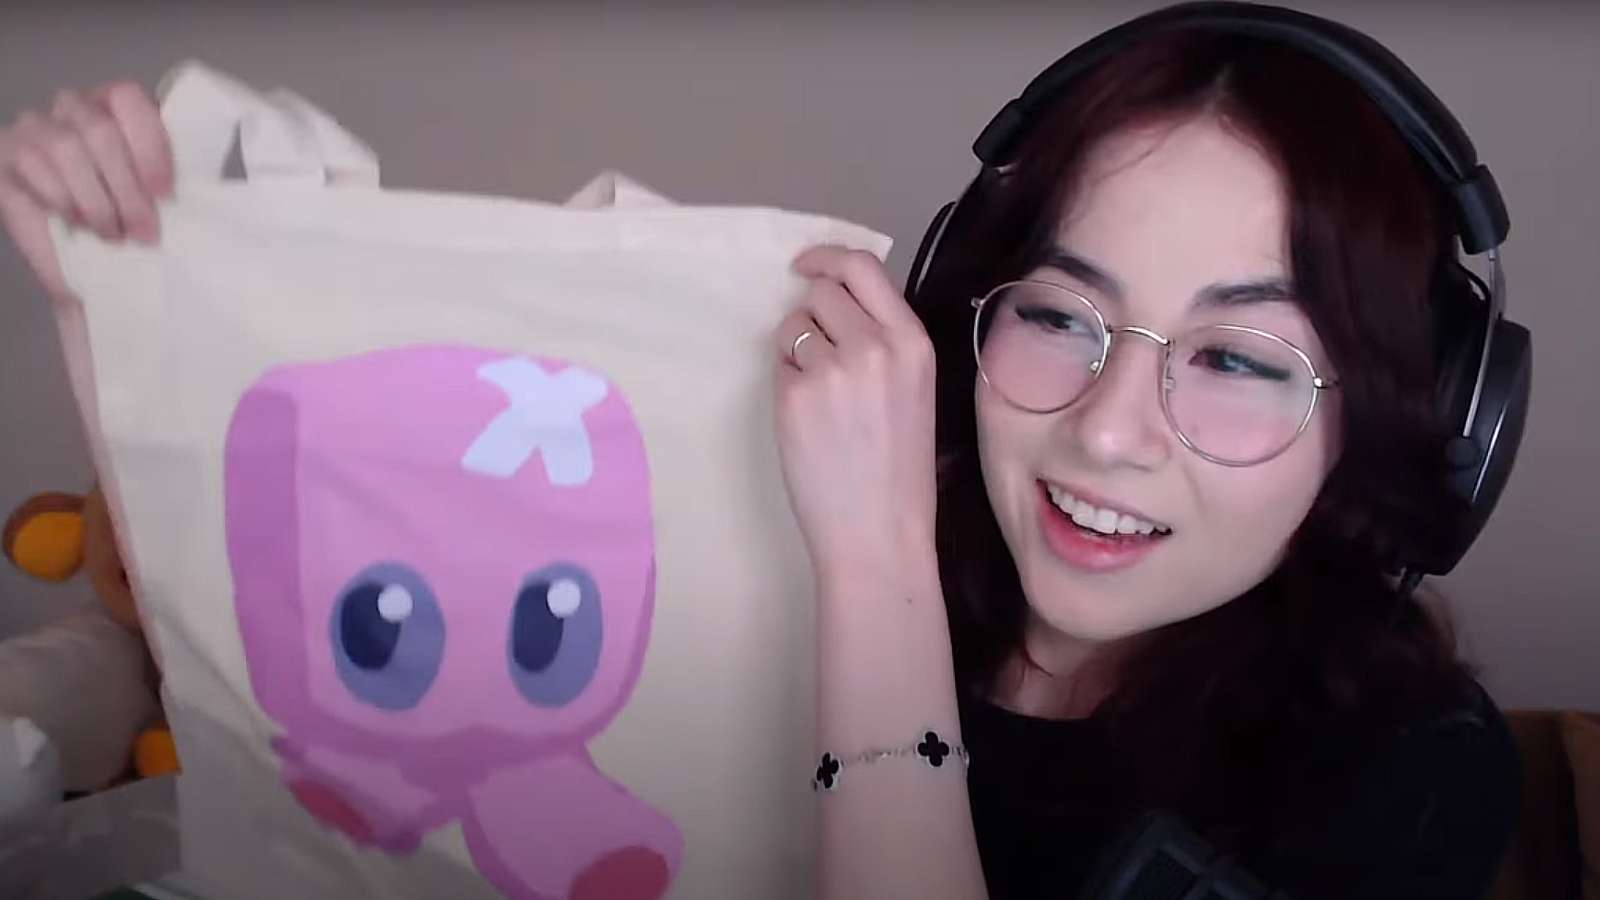 Kyedae with her custom-painted bag from Riot